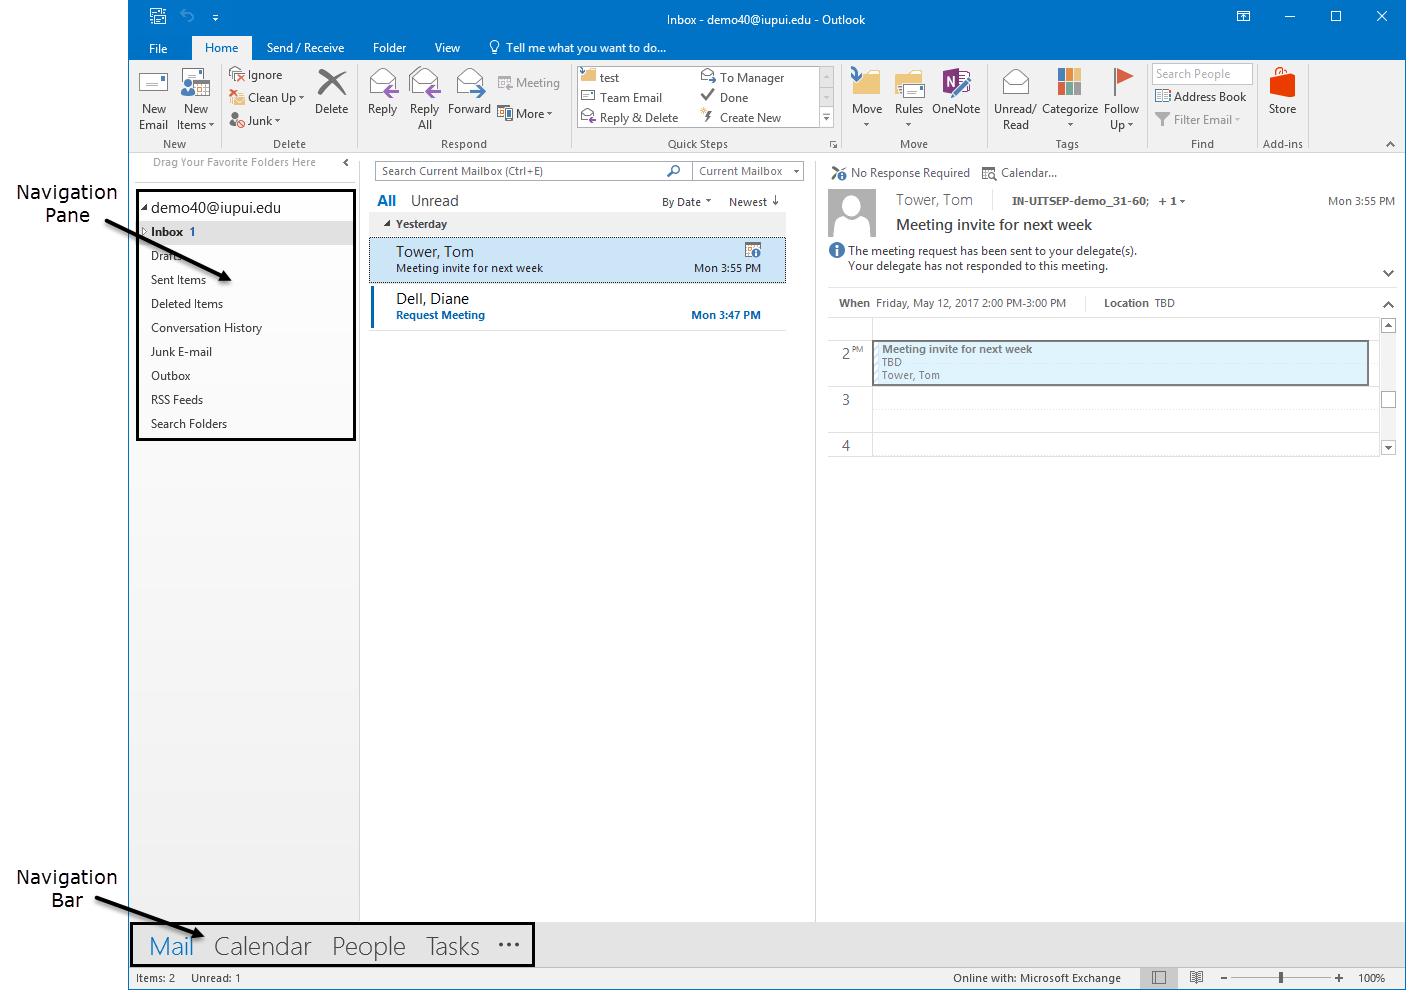 Image of the Outlook default Inbox view